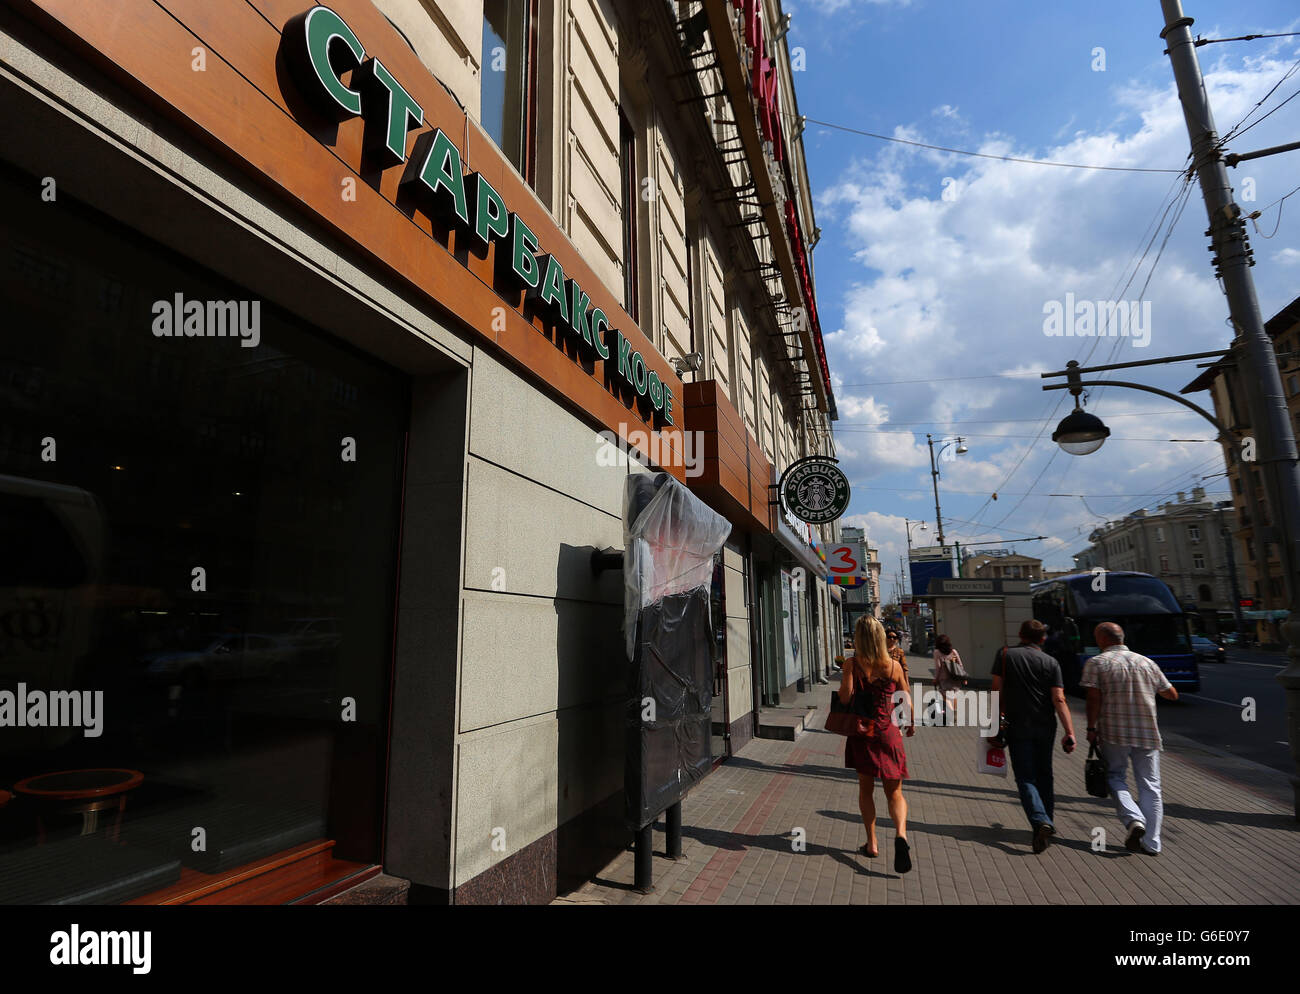 Athletics - 2013 IAAF World Athletics Championships - Day Four - Luzhniki Stadium. General view of a Starbucks Coffee shop sign in Moscow, Russia. Stock Photo